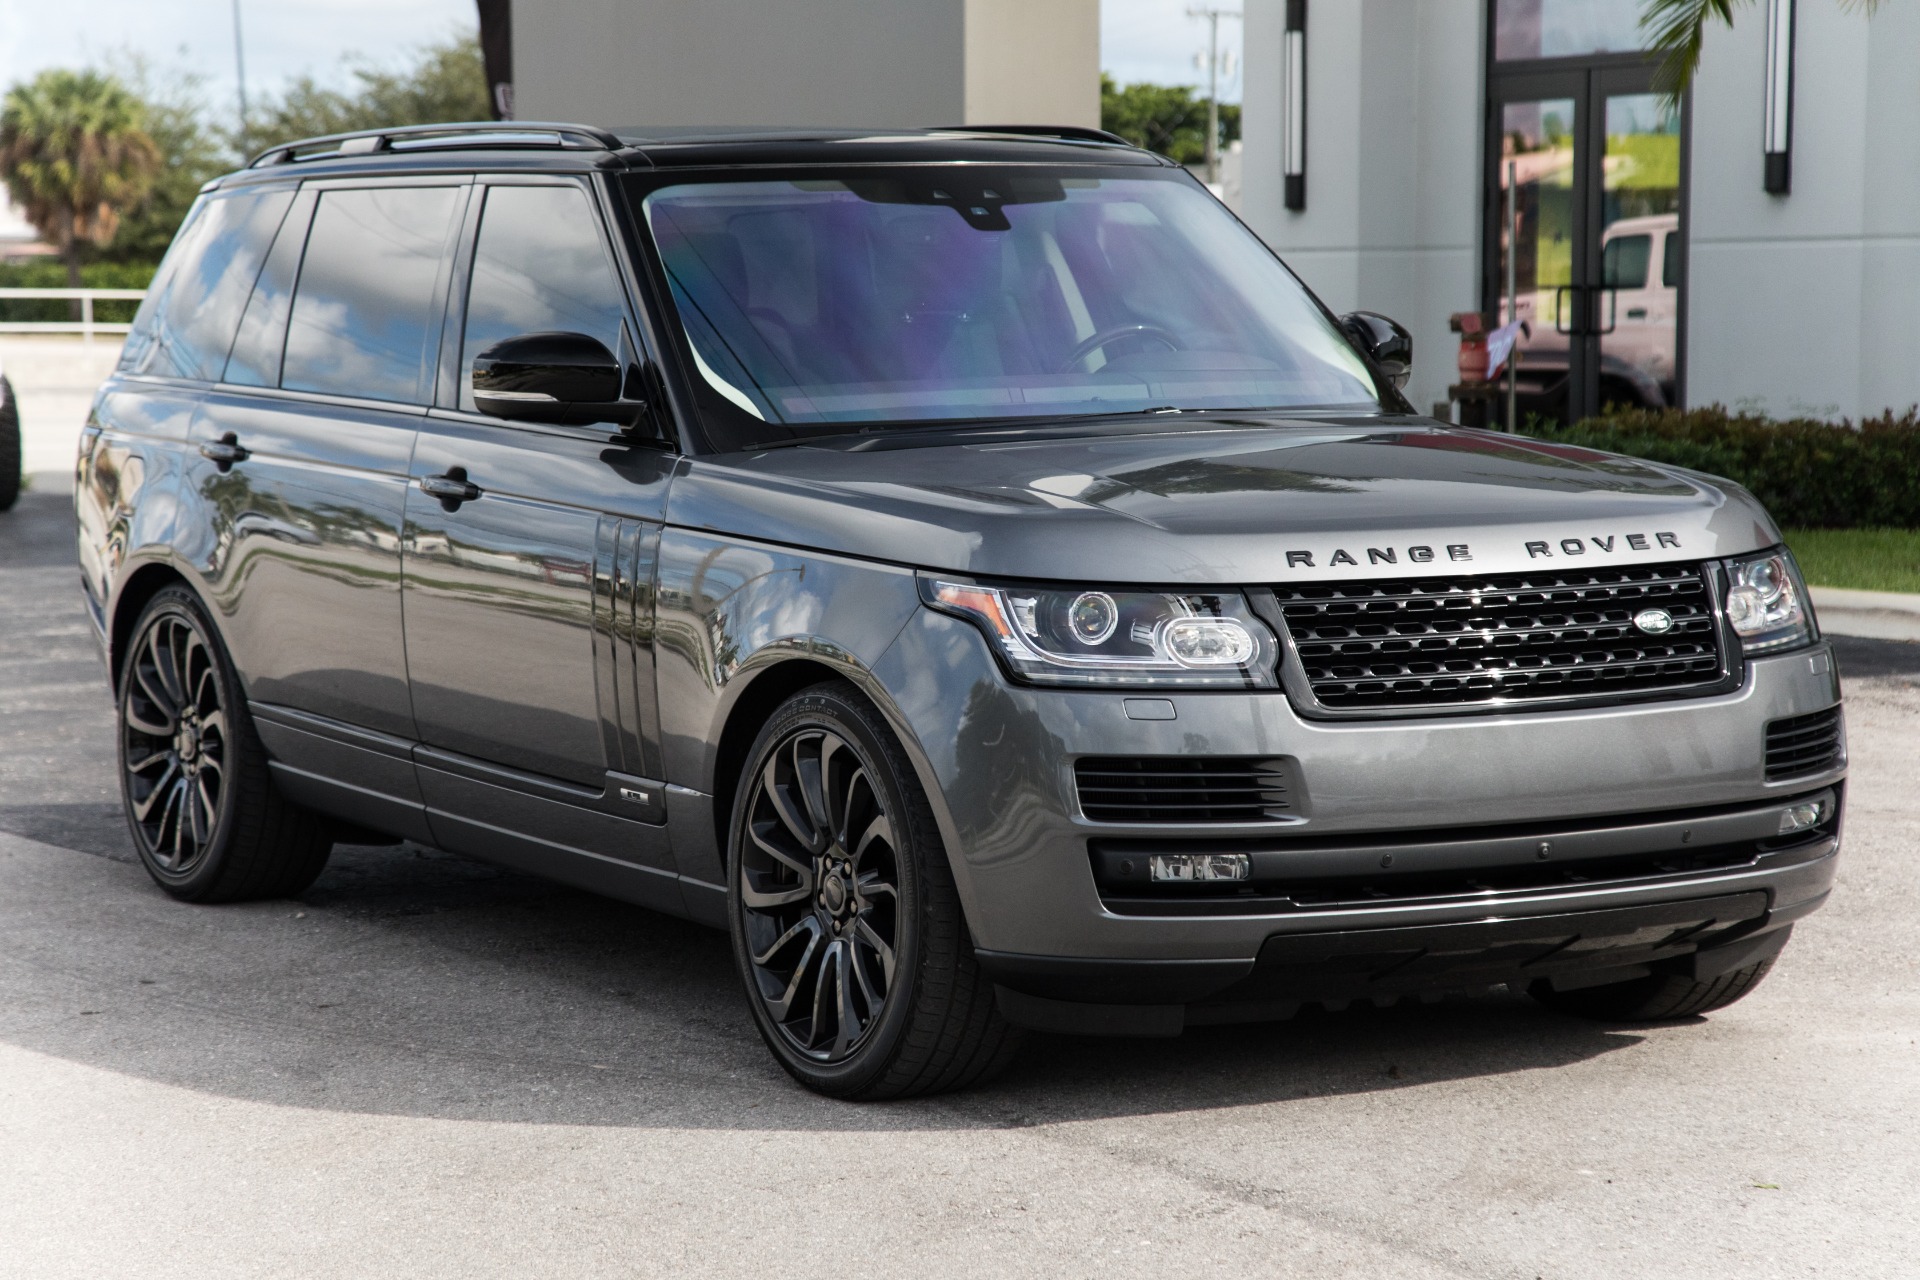 Used 2017 Land Rover Range Rover Supercharged Lwb For Sale 82900